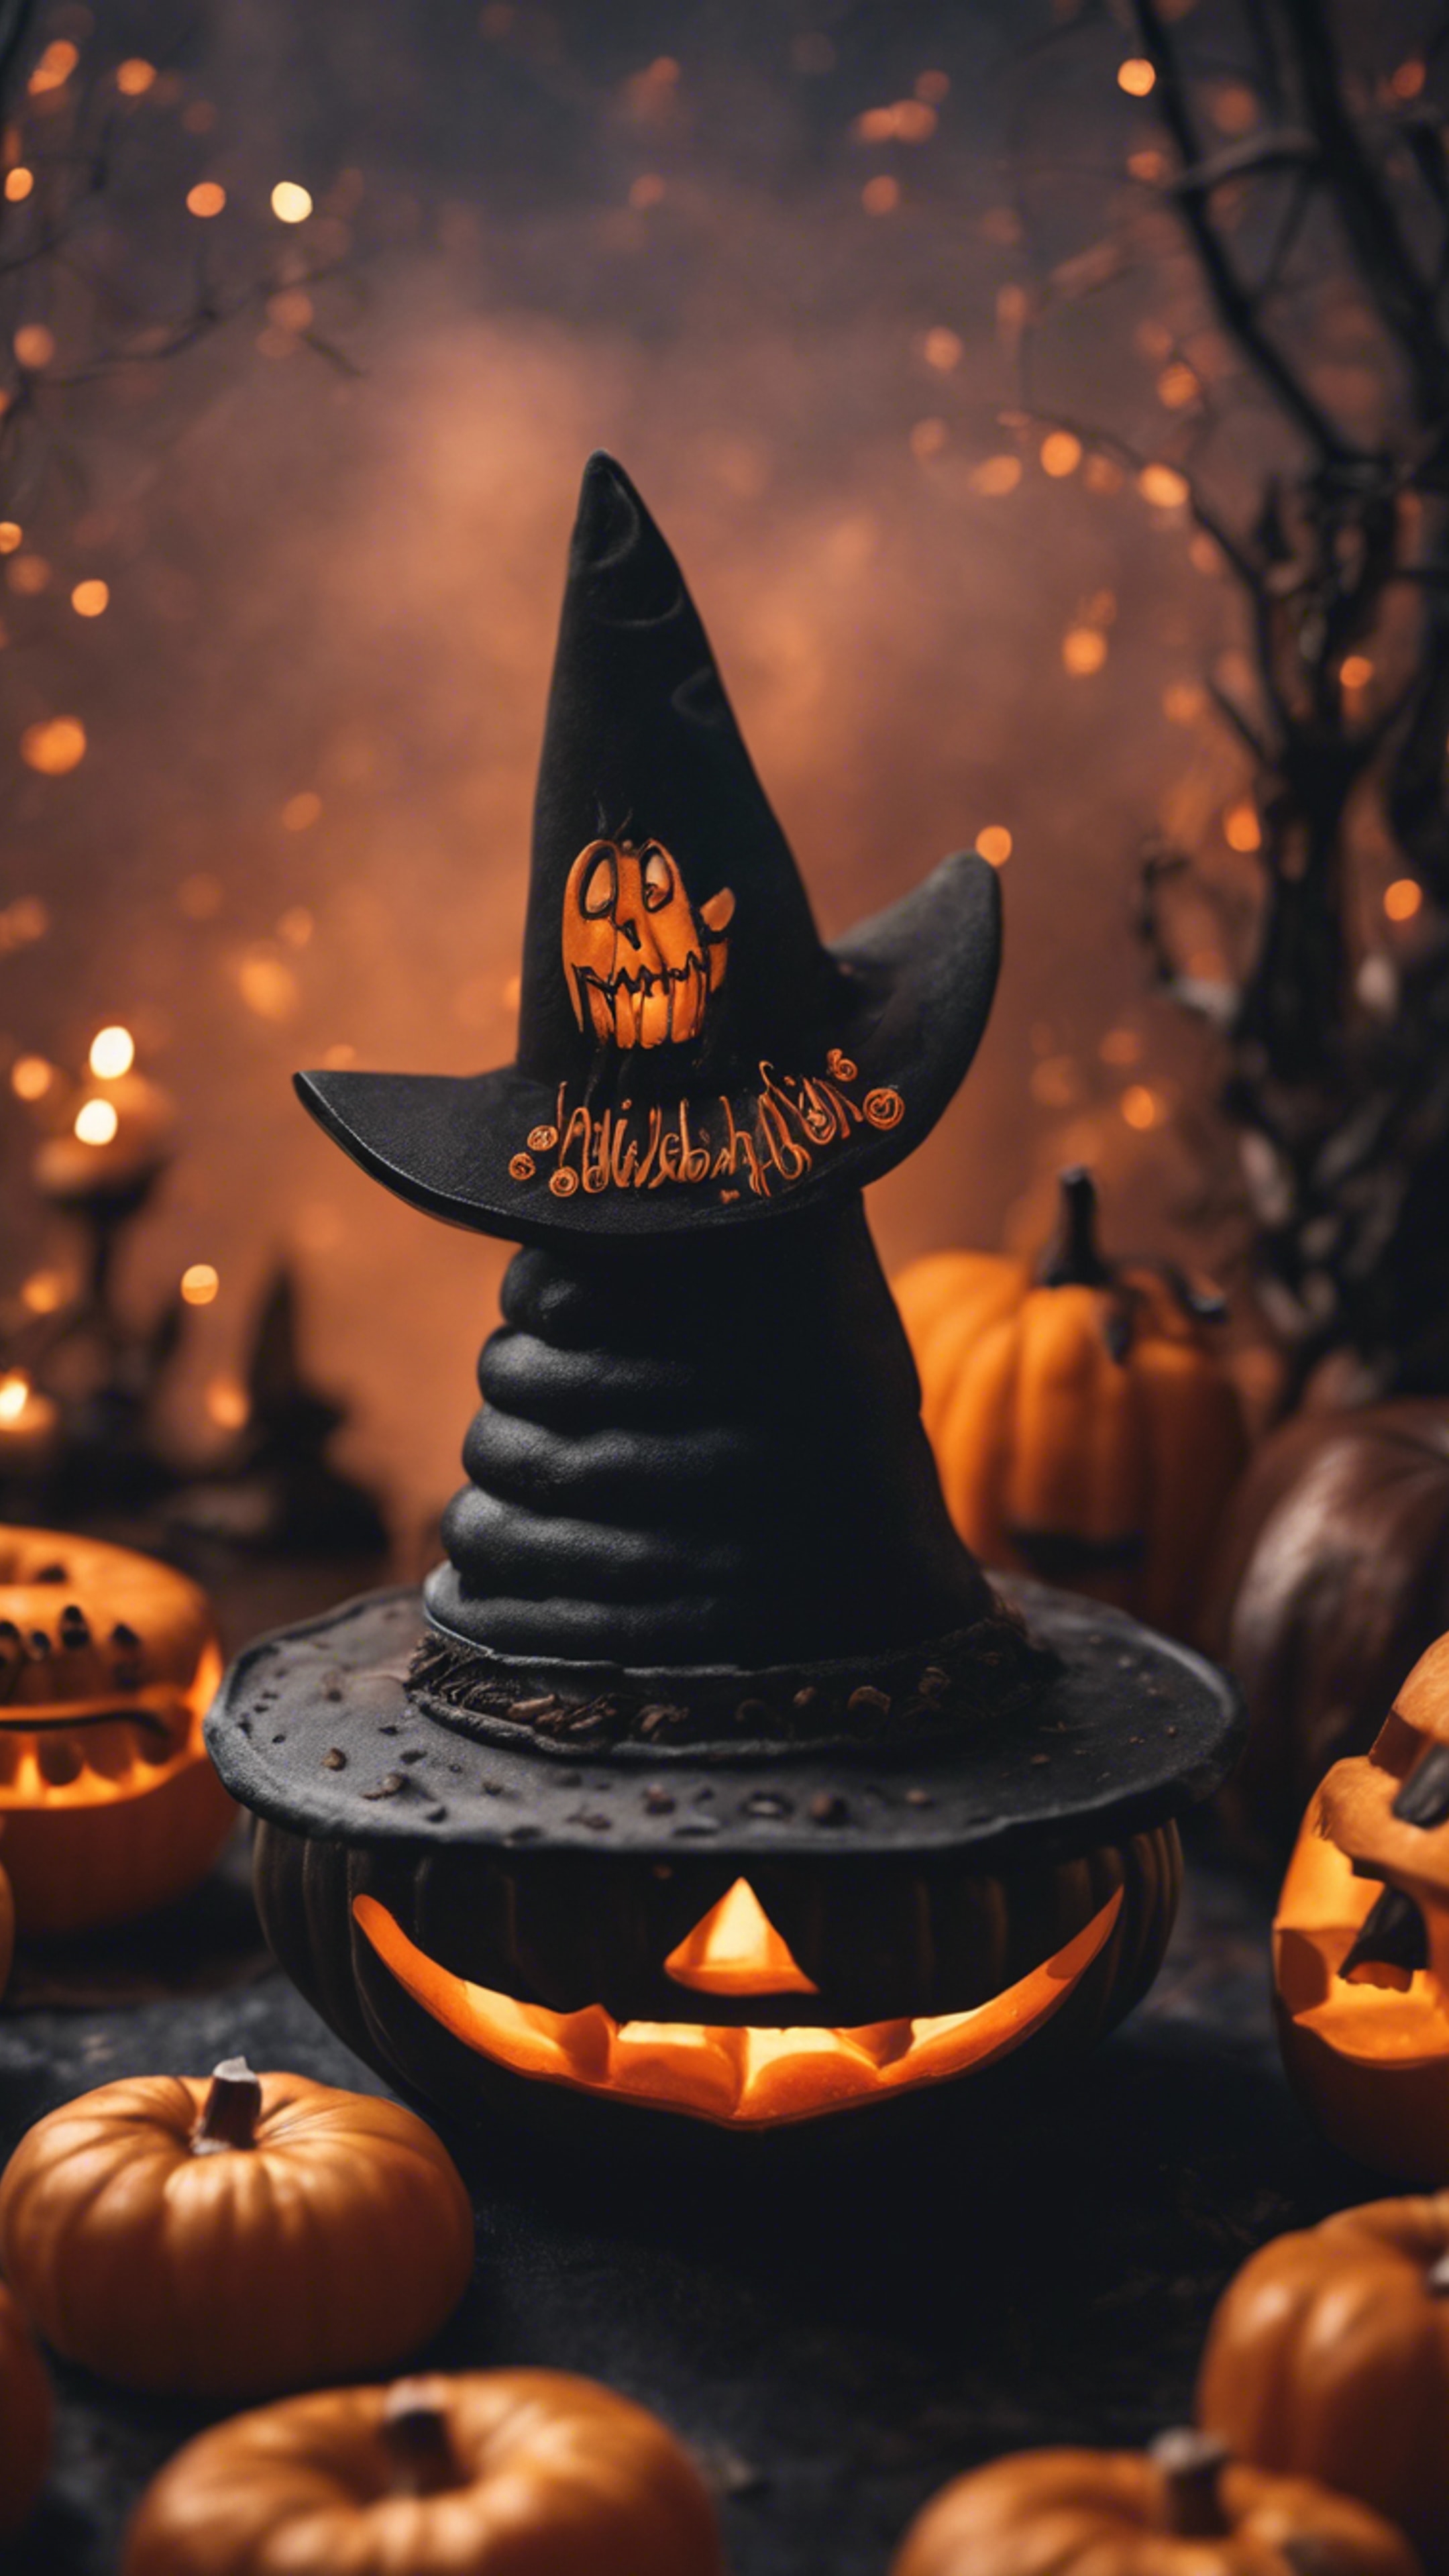 A spooky scene with jack-o-lanterns and a black witch's hat on a pumpkin-spiced donut. ورق الجدران[393956df6a264774b0c0]